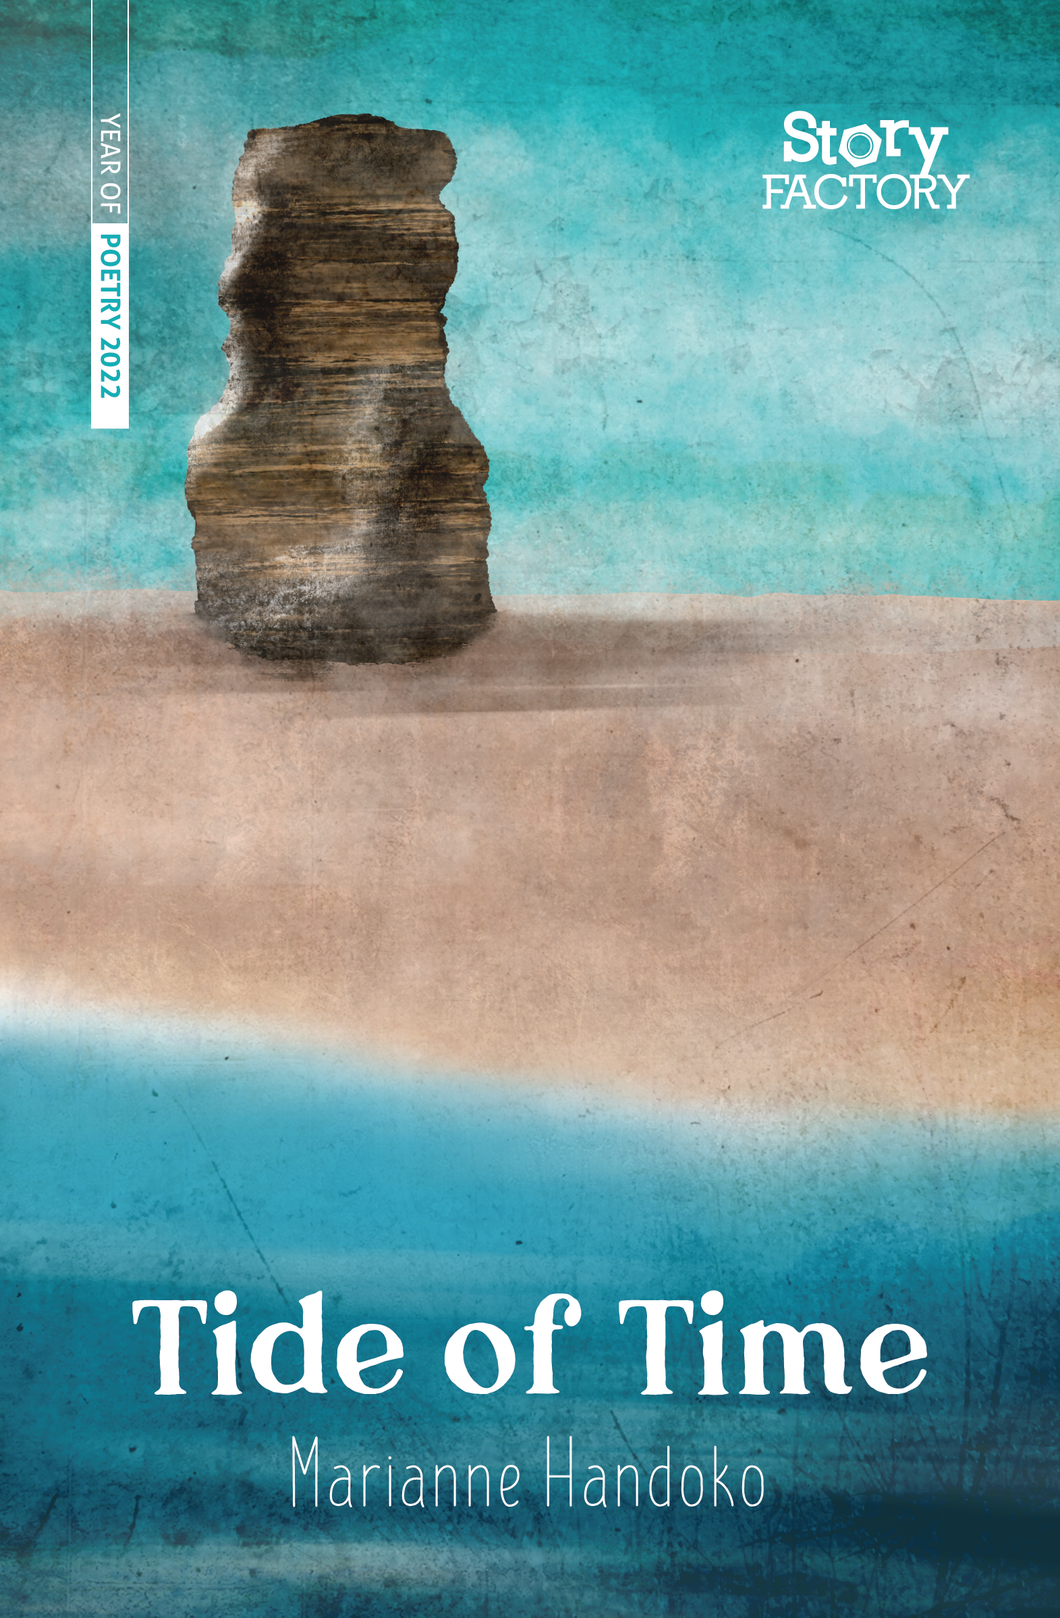 Tide of Time by Marianne Handoko